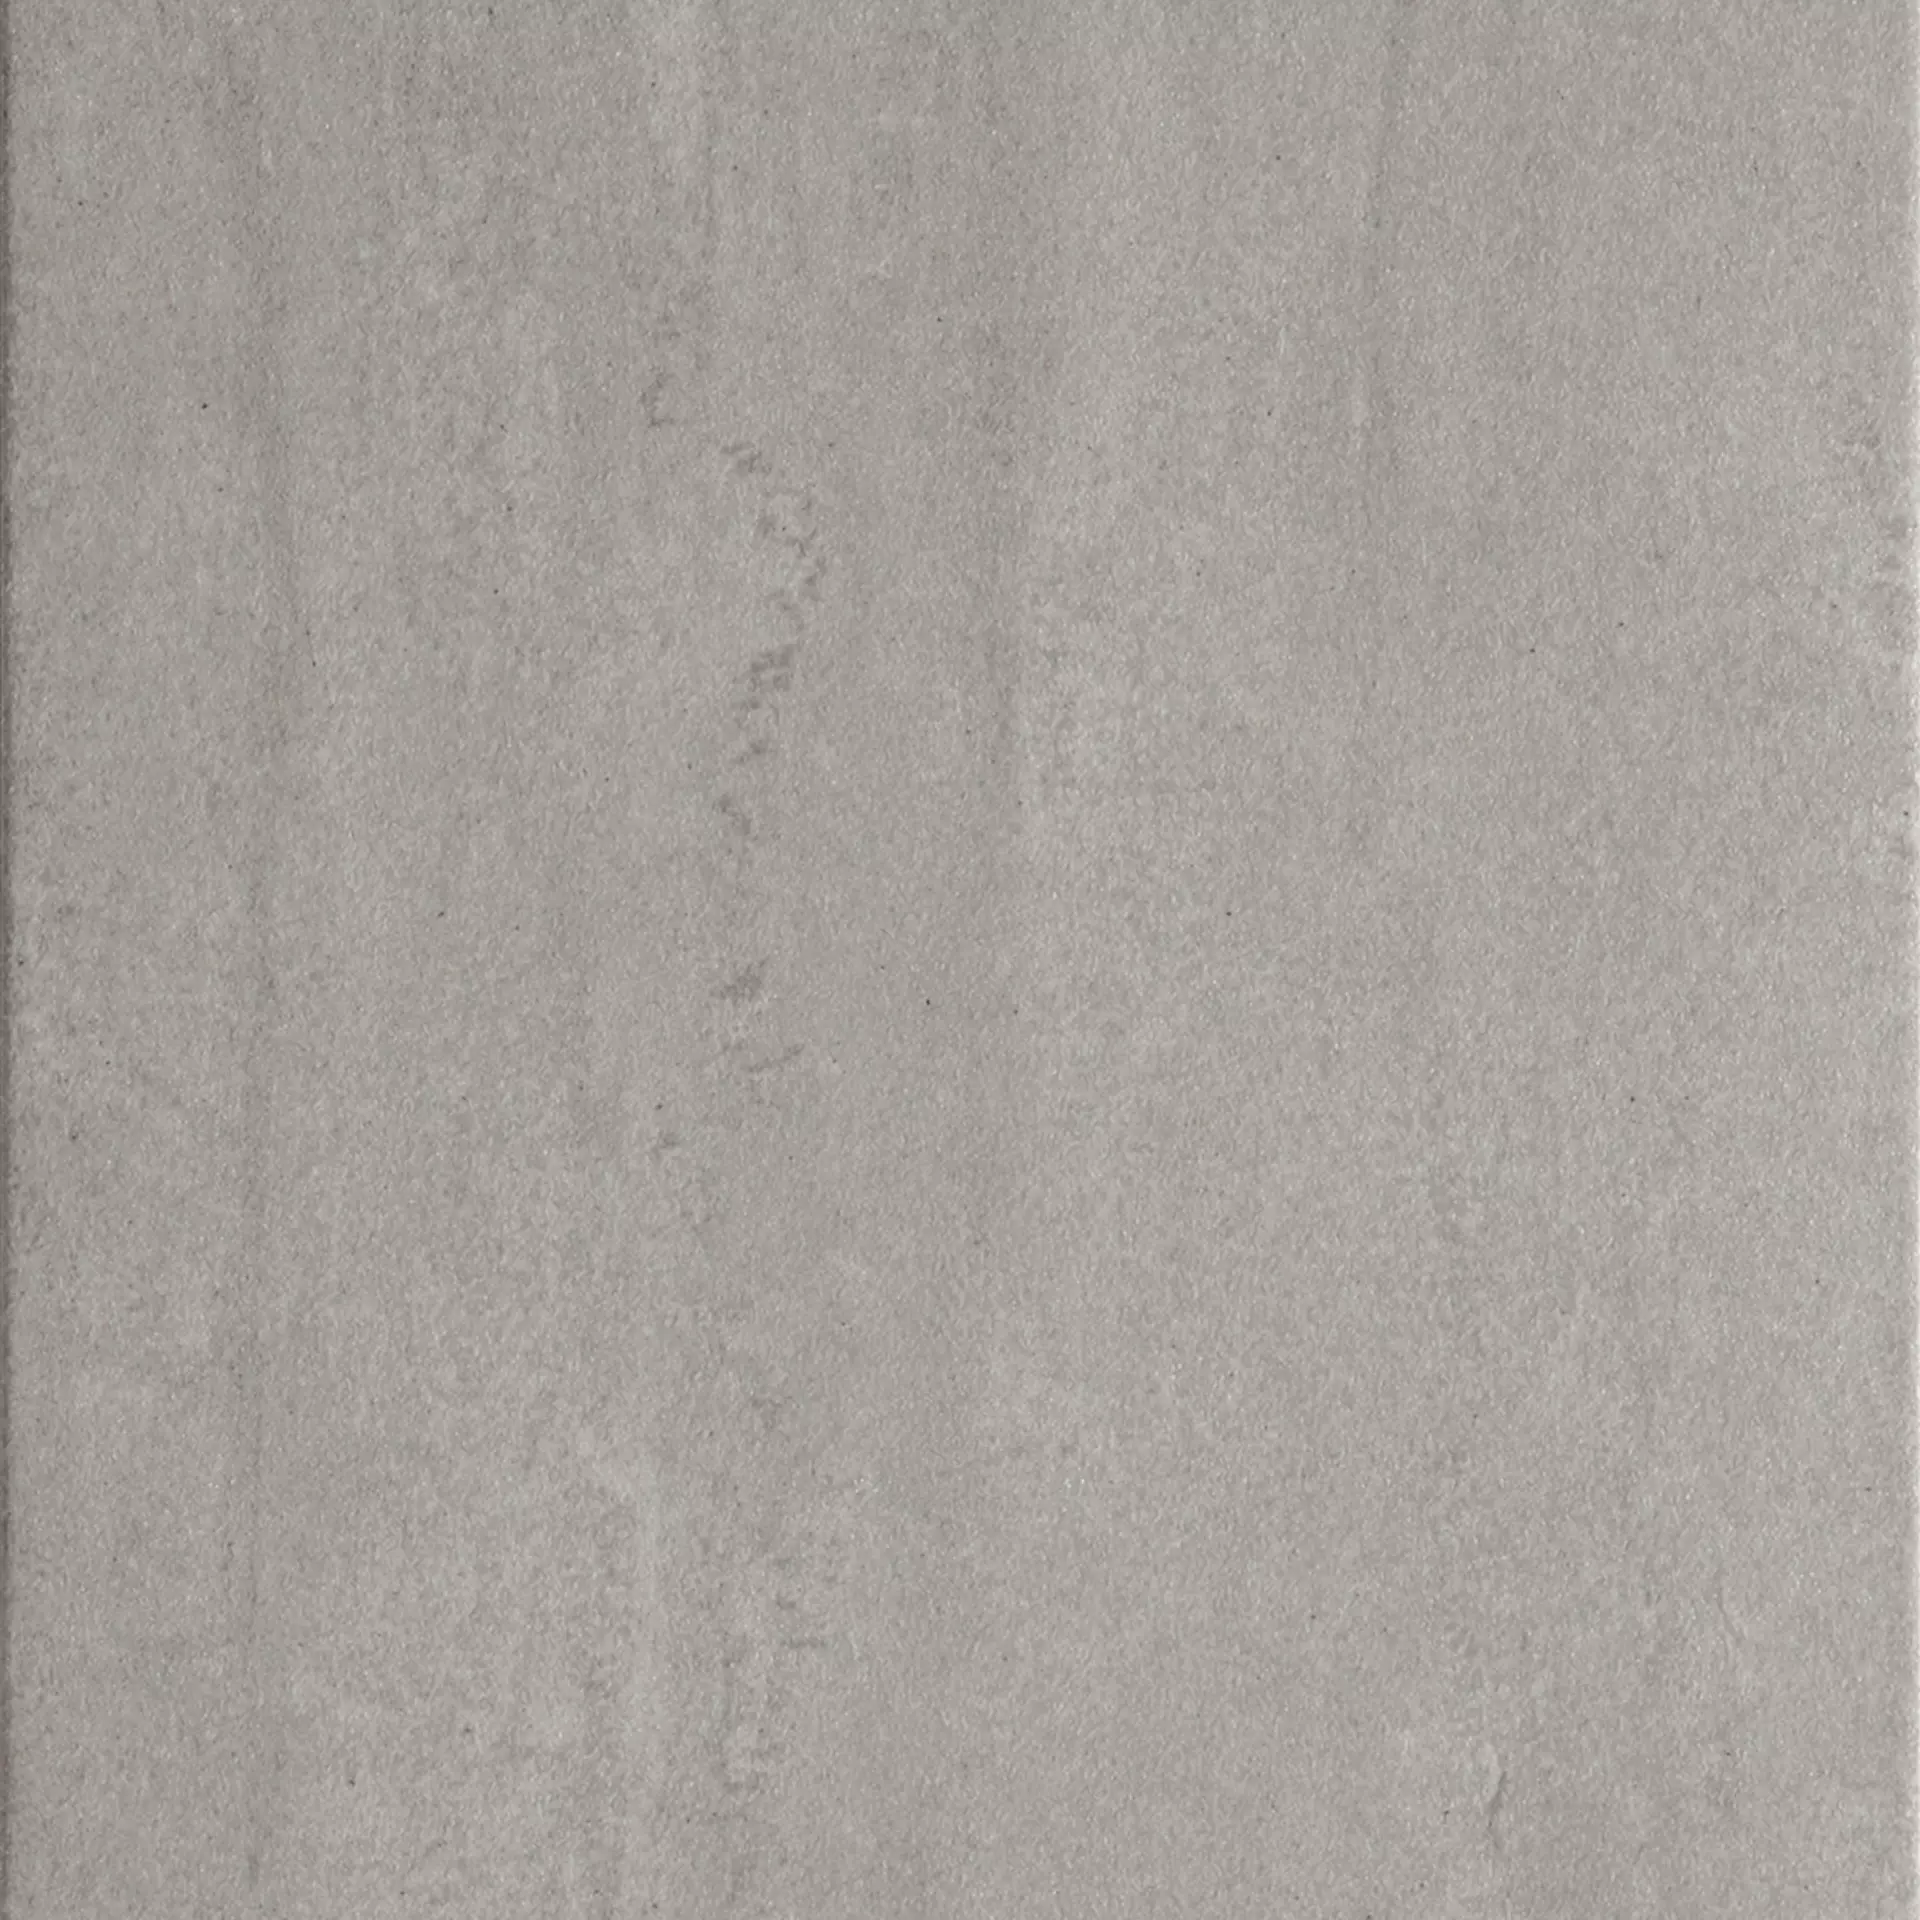 Rondine Contract Silver Lappato J84036 60x60cm rectified 9,5mm